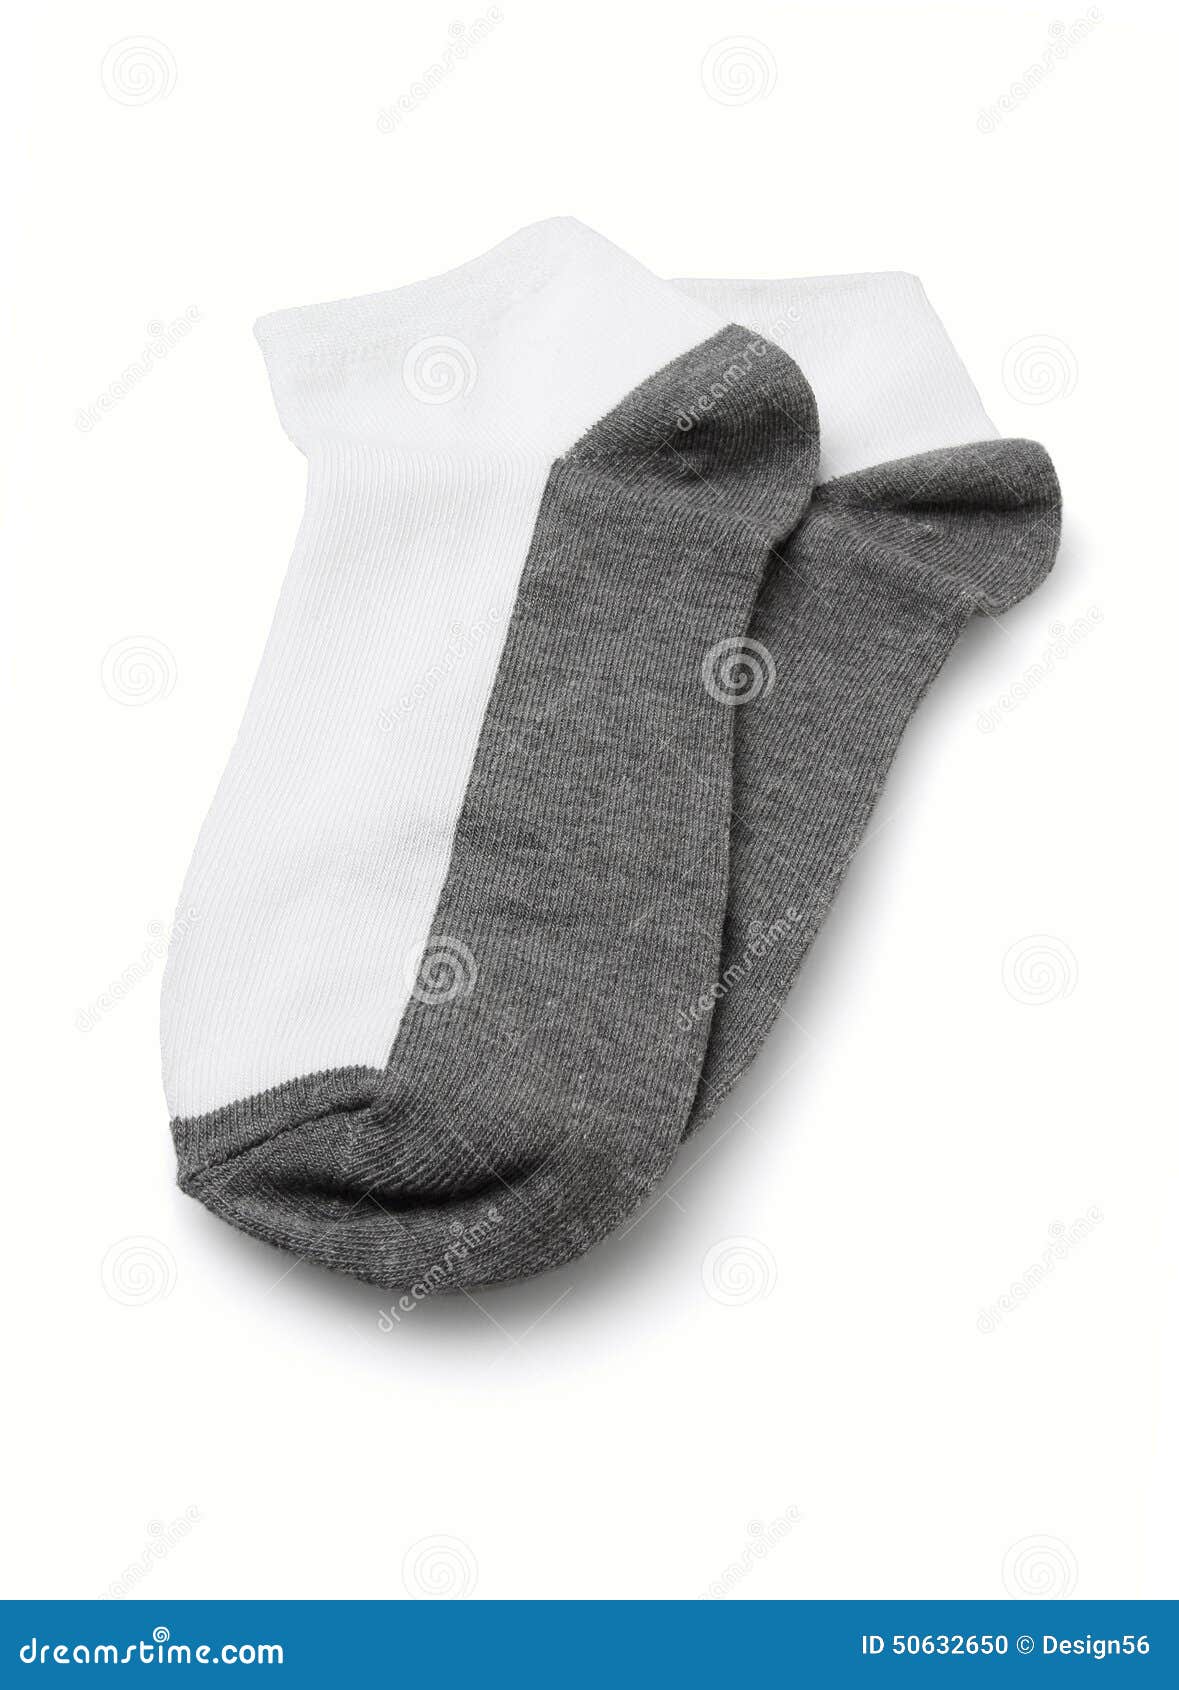 Ankle Socks stock photo. Image of isolated, comfortable - 50632650